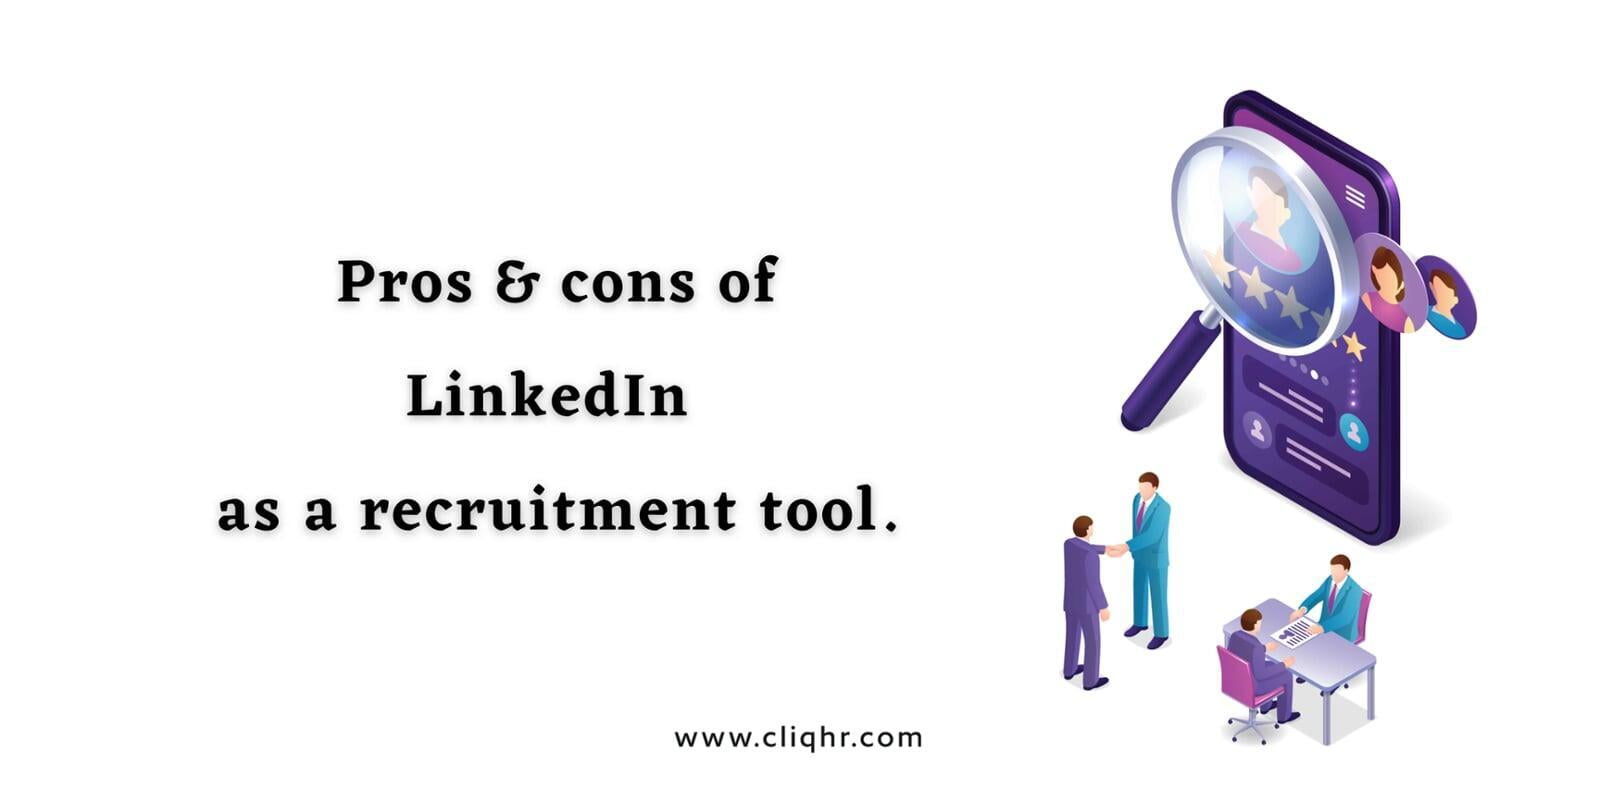 What are the pros & cons of LinkedIn as a recruitment tool?